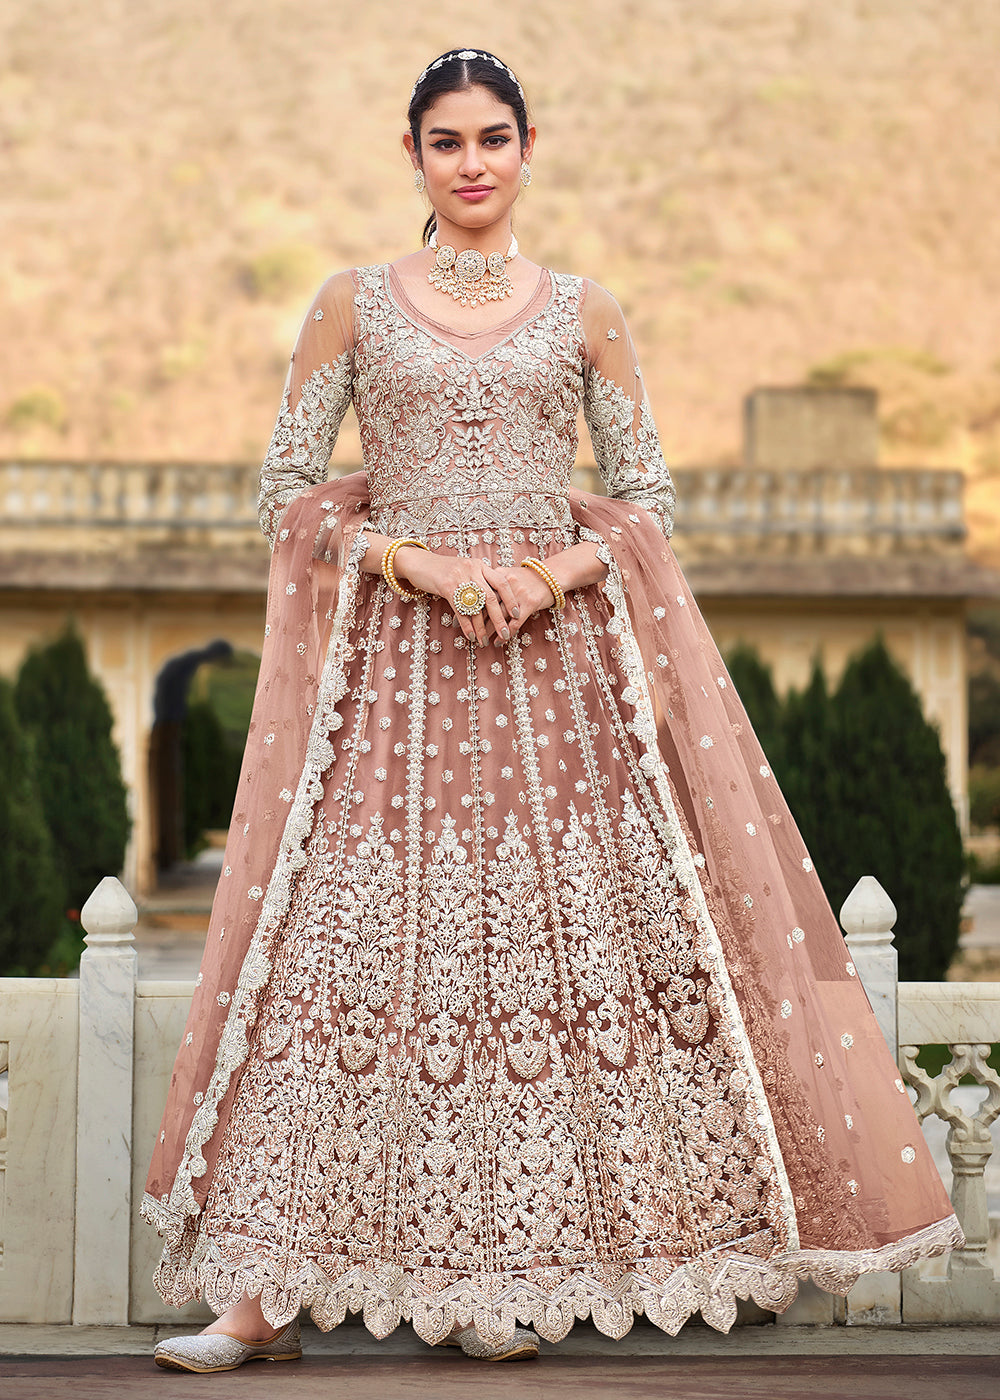 Buy Now Butterfly Net Peach Embroidered Wedding Bridesmaid Anarkali Suit Online in USA, UK, Australia, New Zealand, Canada, Italy & Worldwide at Empress Clothing.